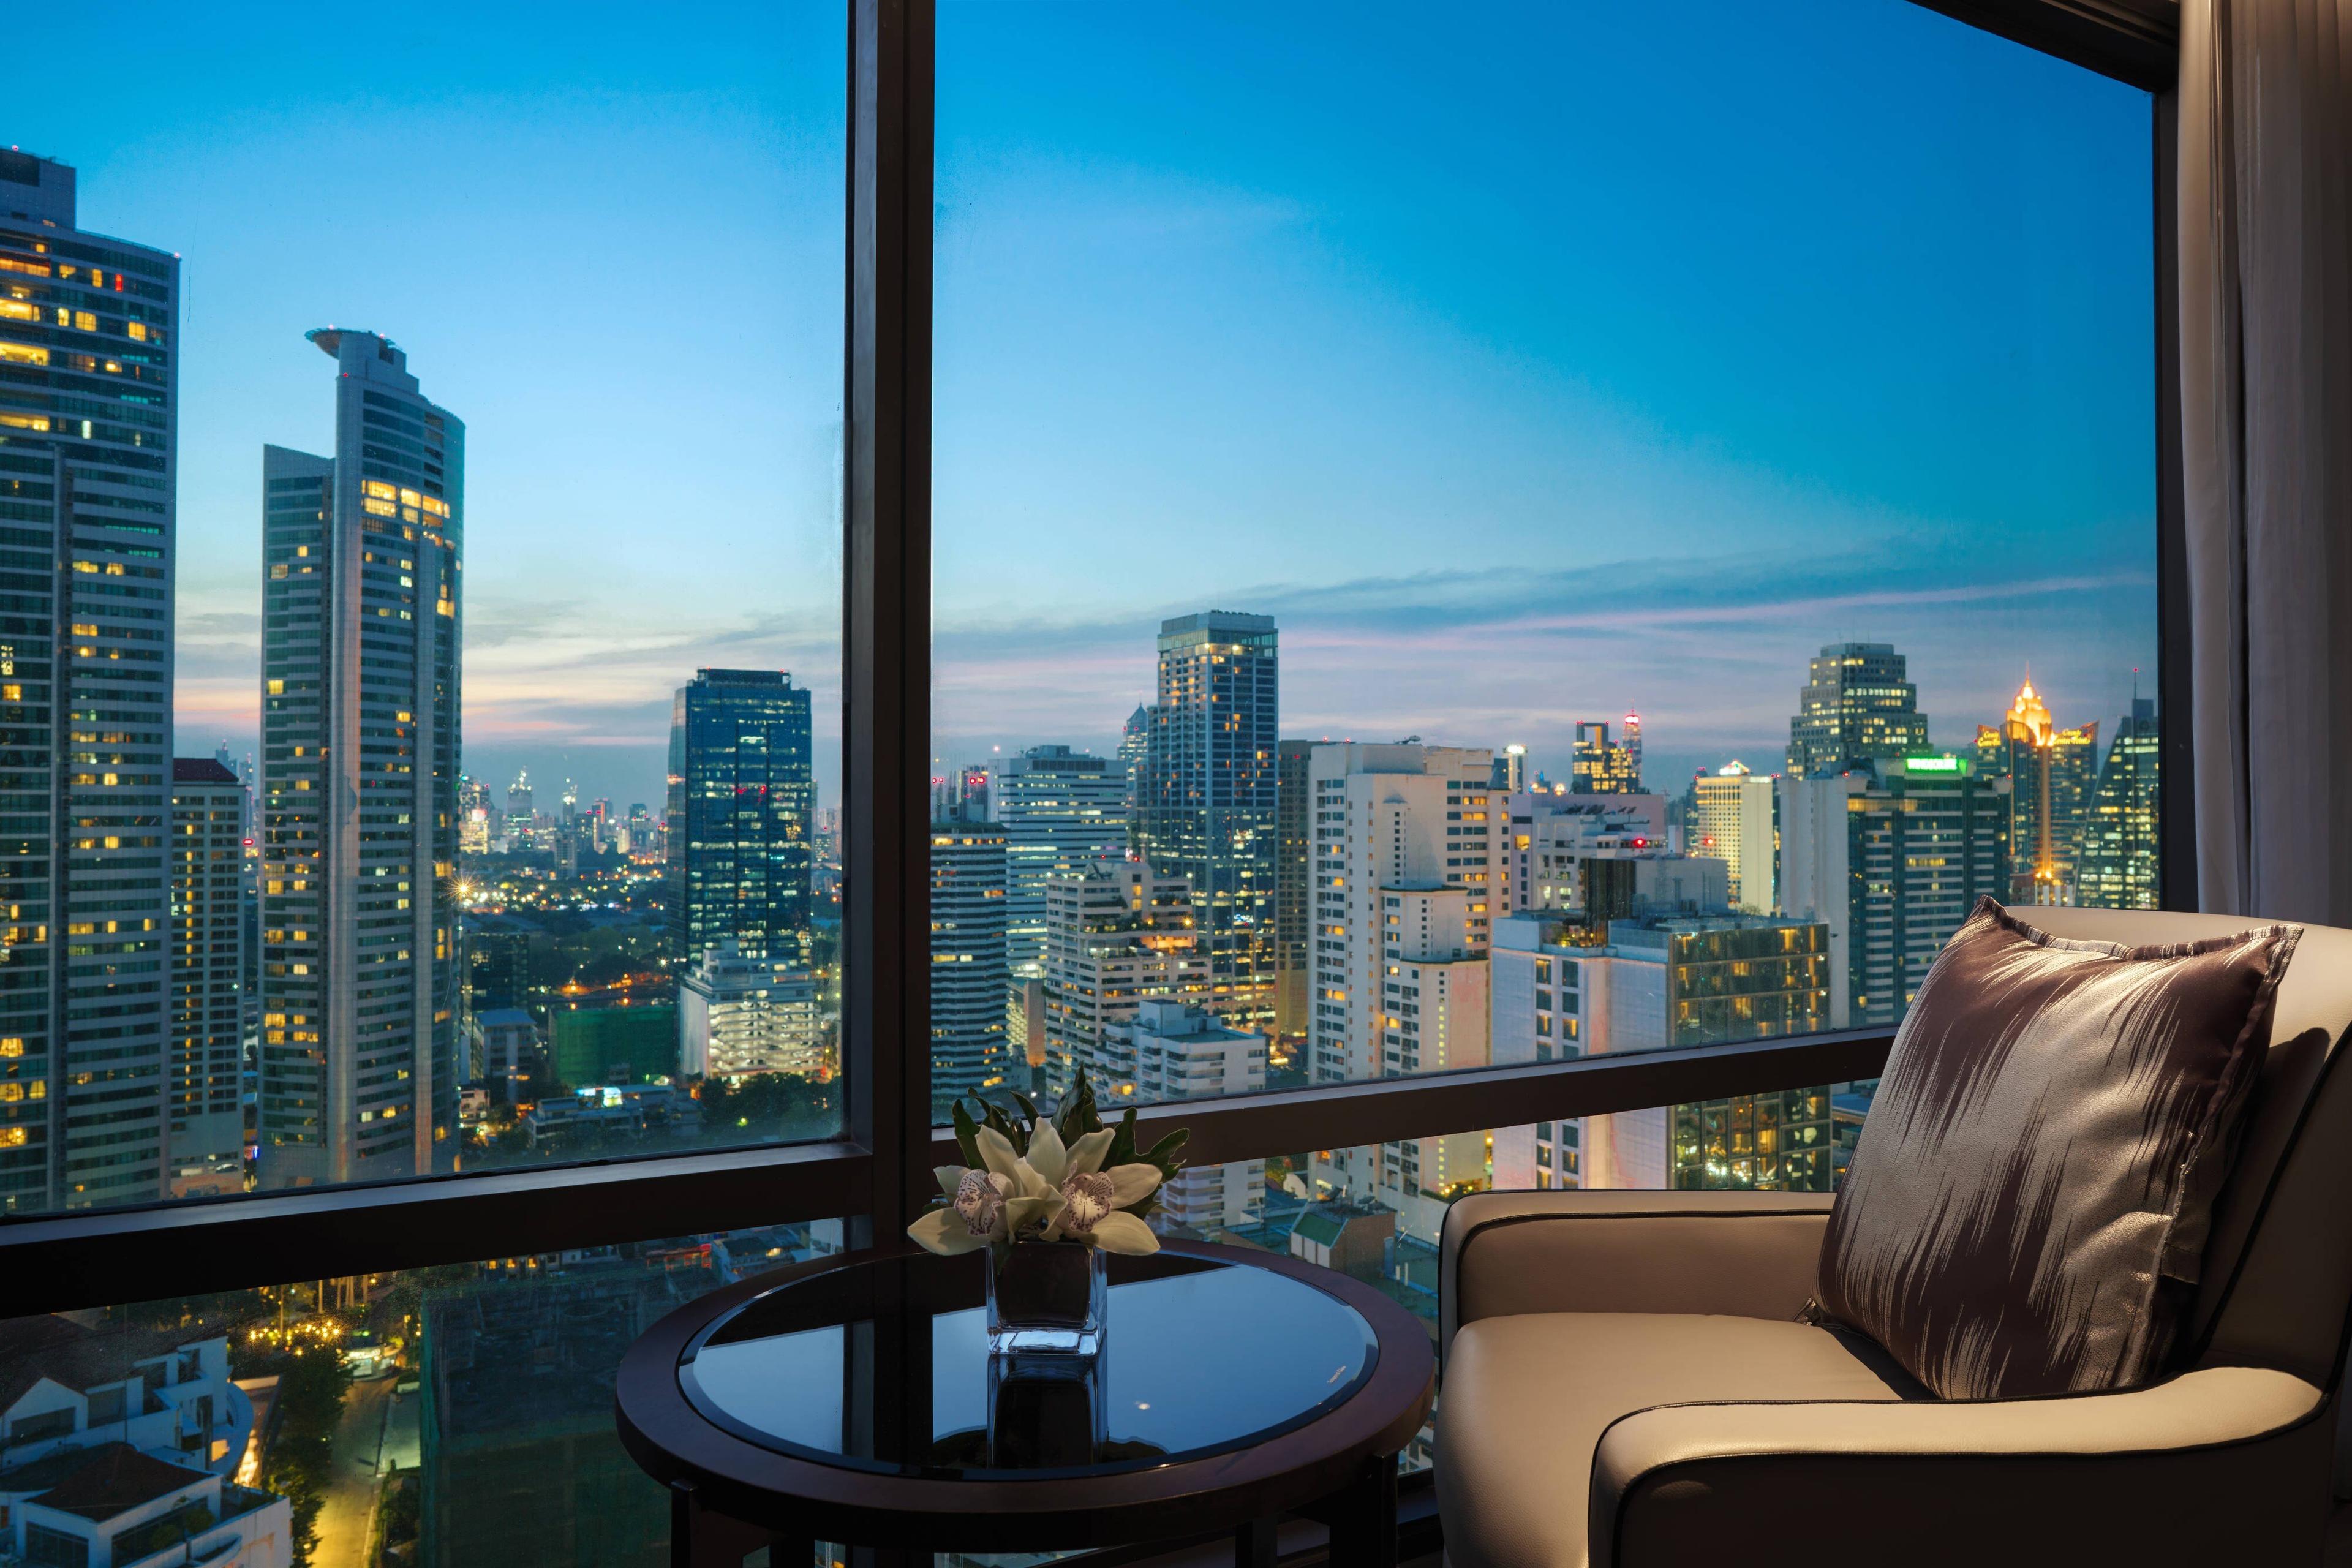 After a busy day on the bustling streets of Bangkok, guests can unwind in the peace and comfort of our city view rooms. Enjoy panoramic views of the glittering night-time skyline through floor-to-ceiling windows.